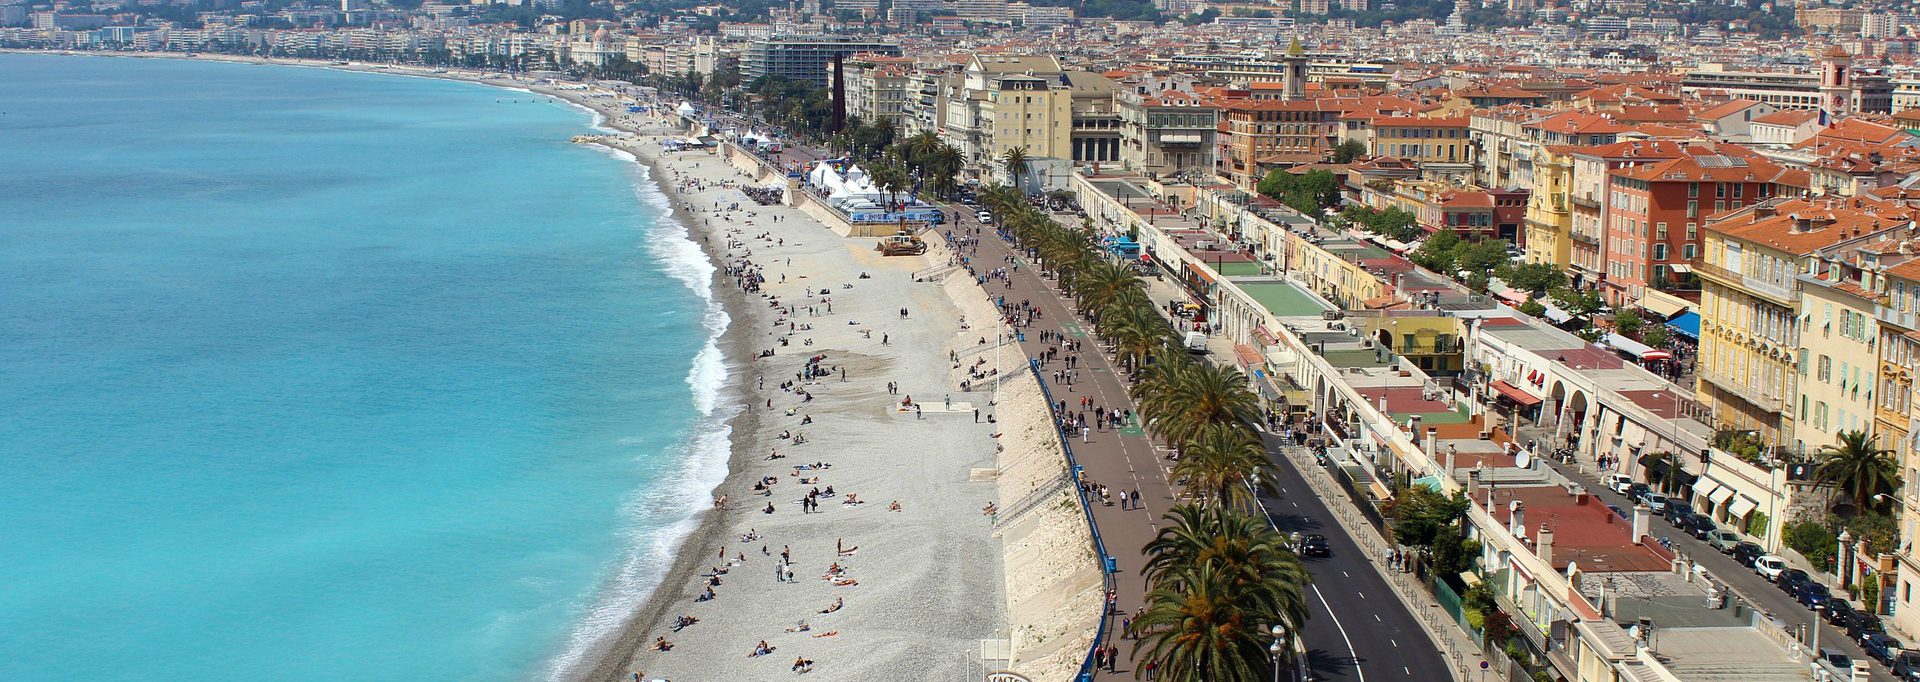 Free Things to Do in Nice France